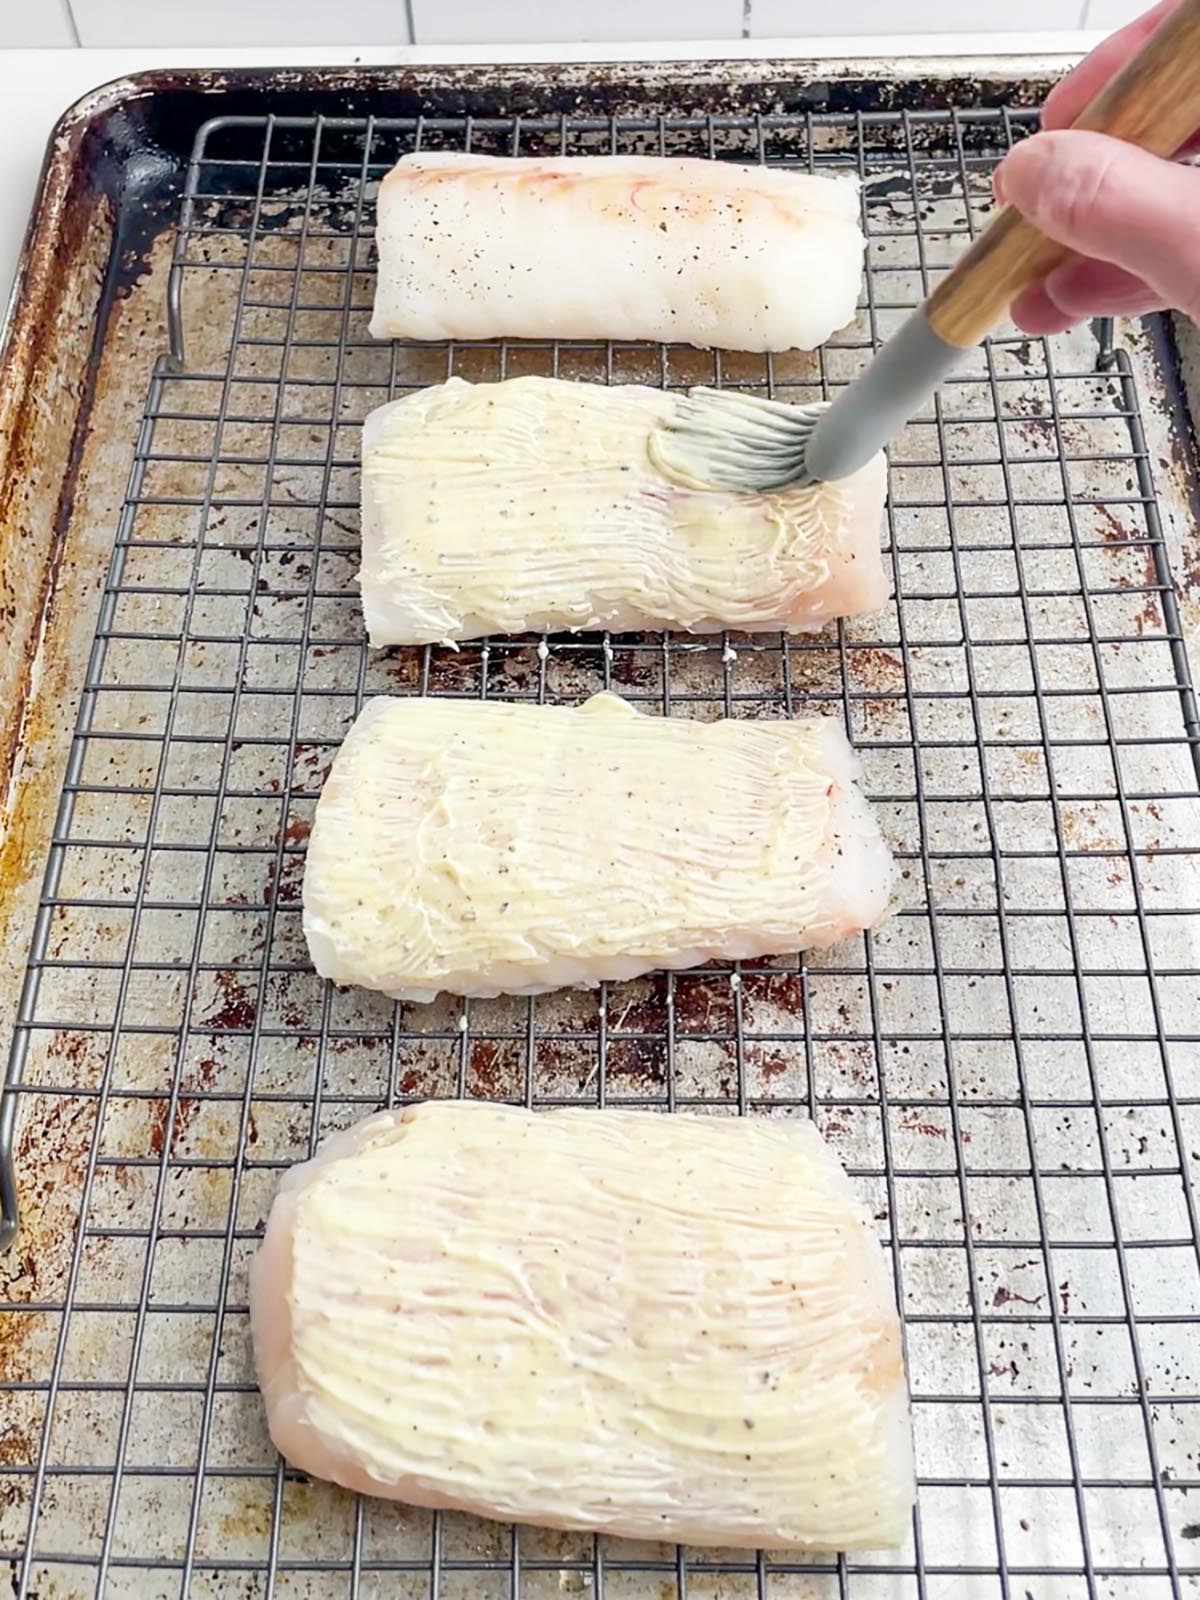 brush spreading mayonnaise mixture on top of cod fillets